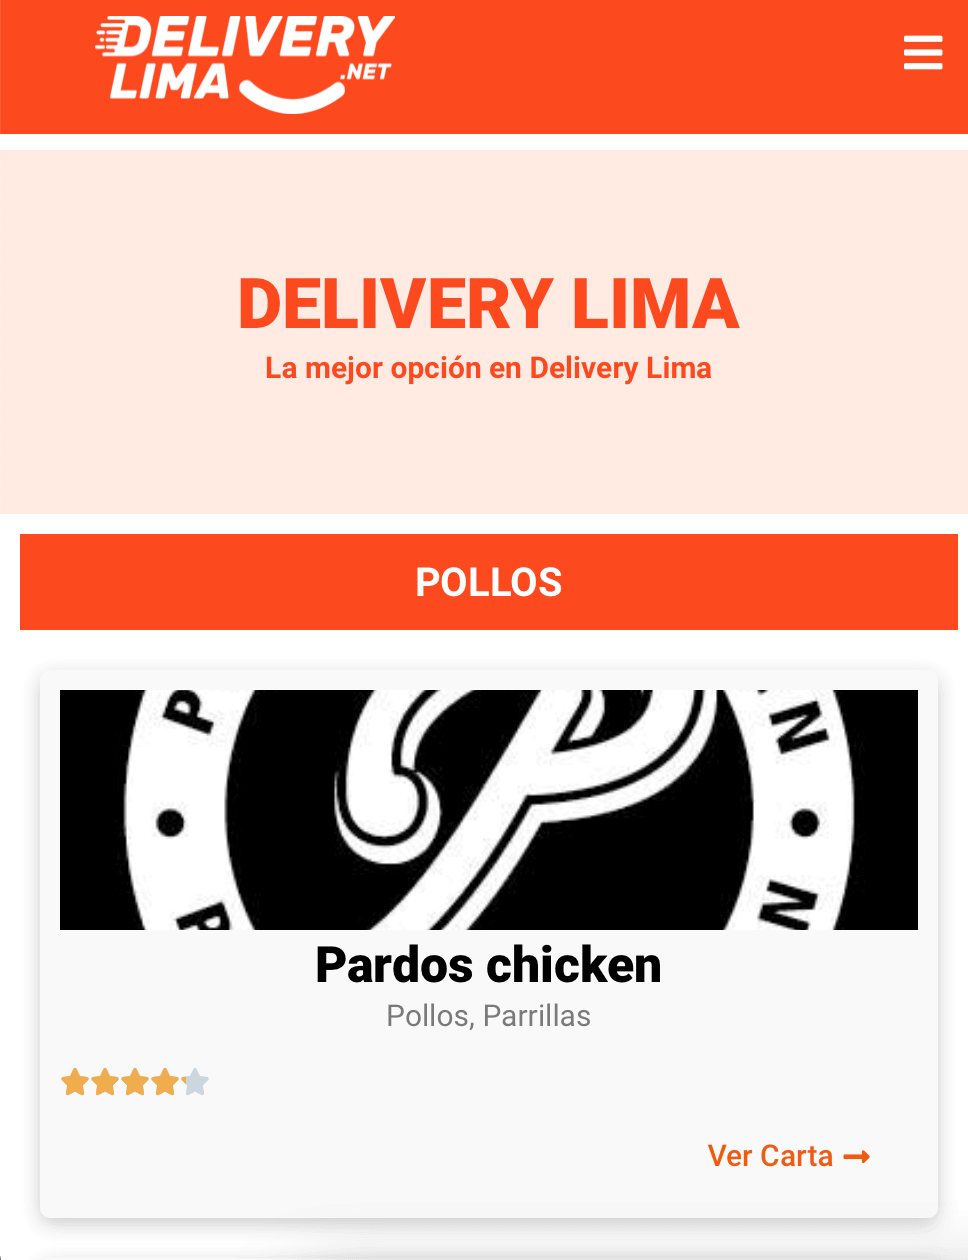 Delivery Lima Web